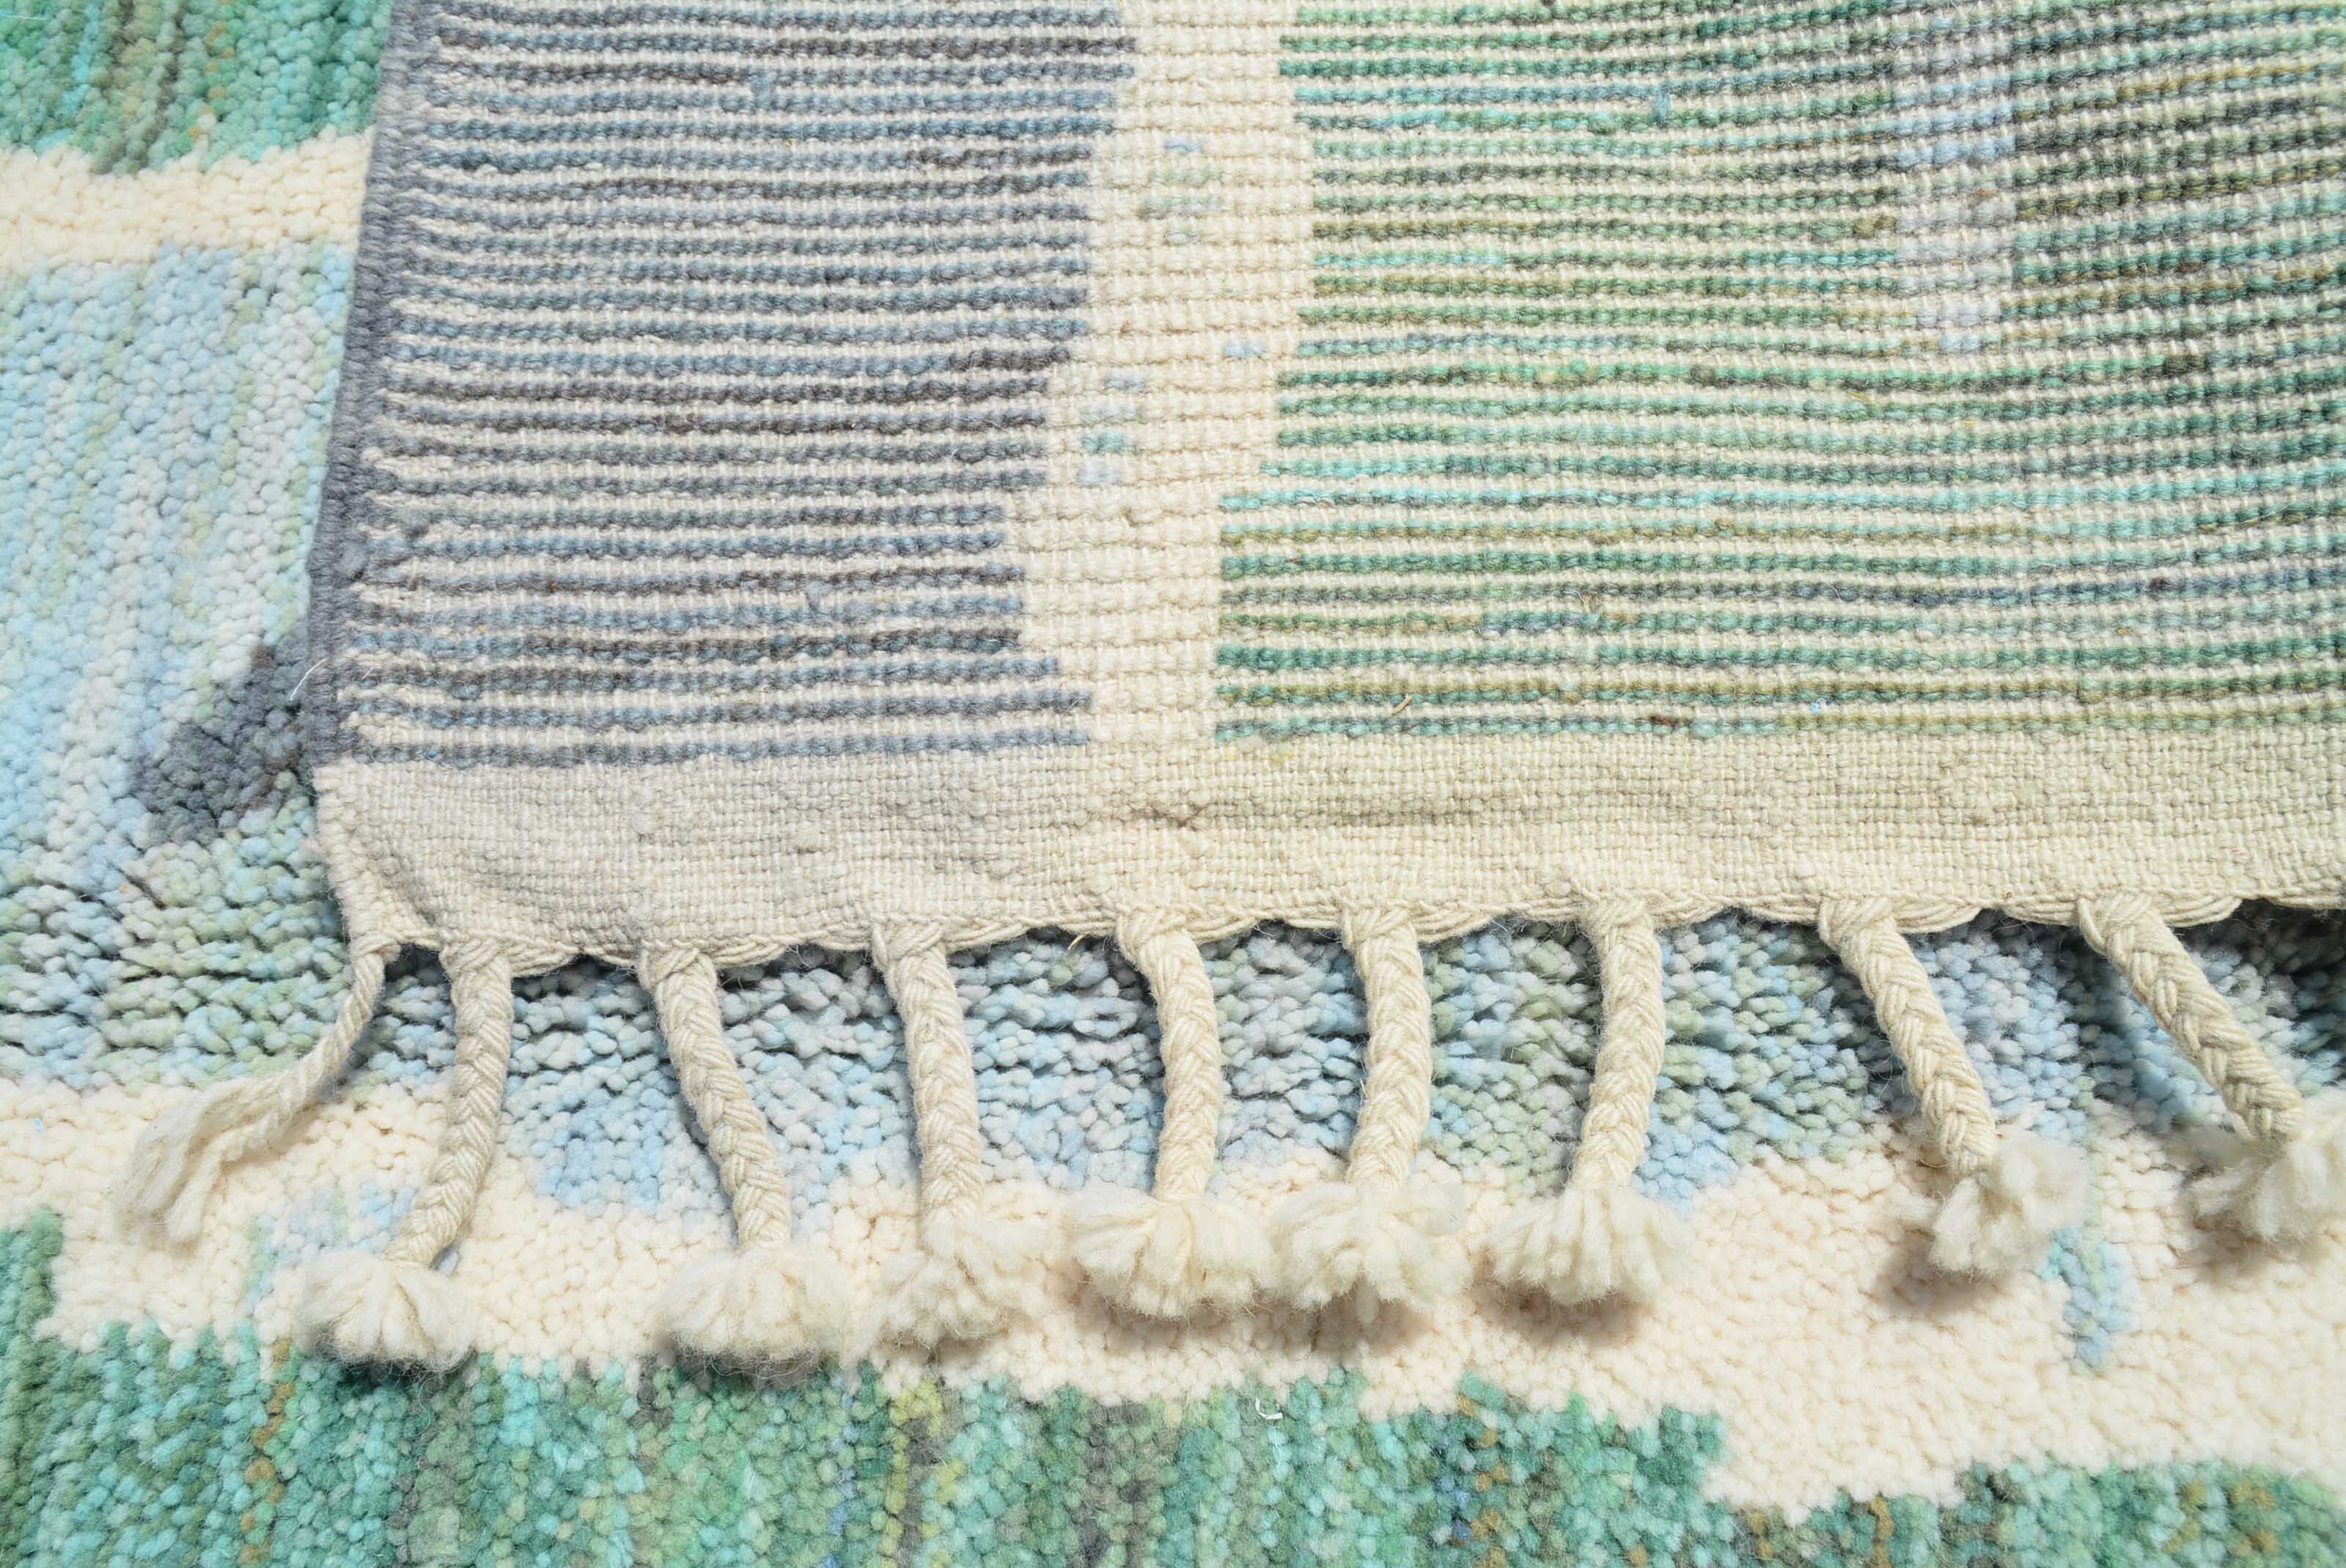 Misty Forest Handmade Moroccan Rug - Elegant Blue and Green Design | Illuminate Collective